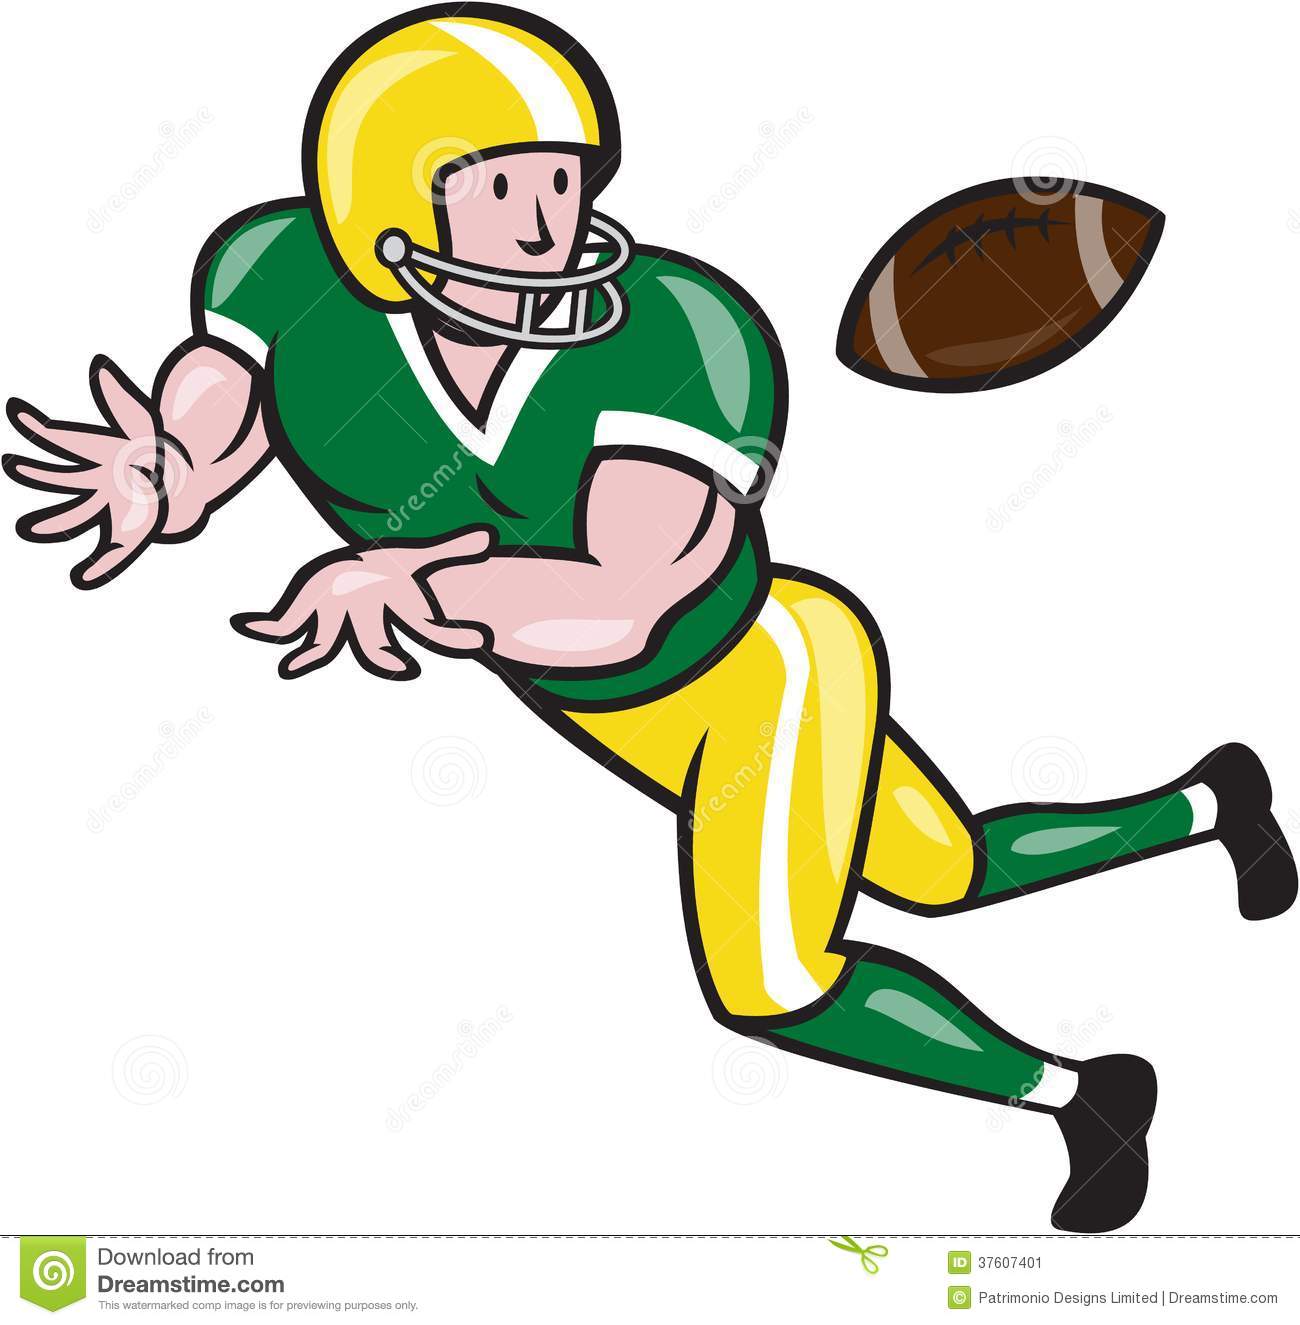 Football Clipart Black And Wh